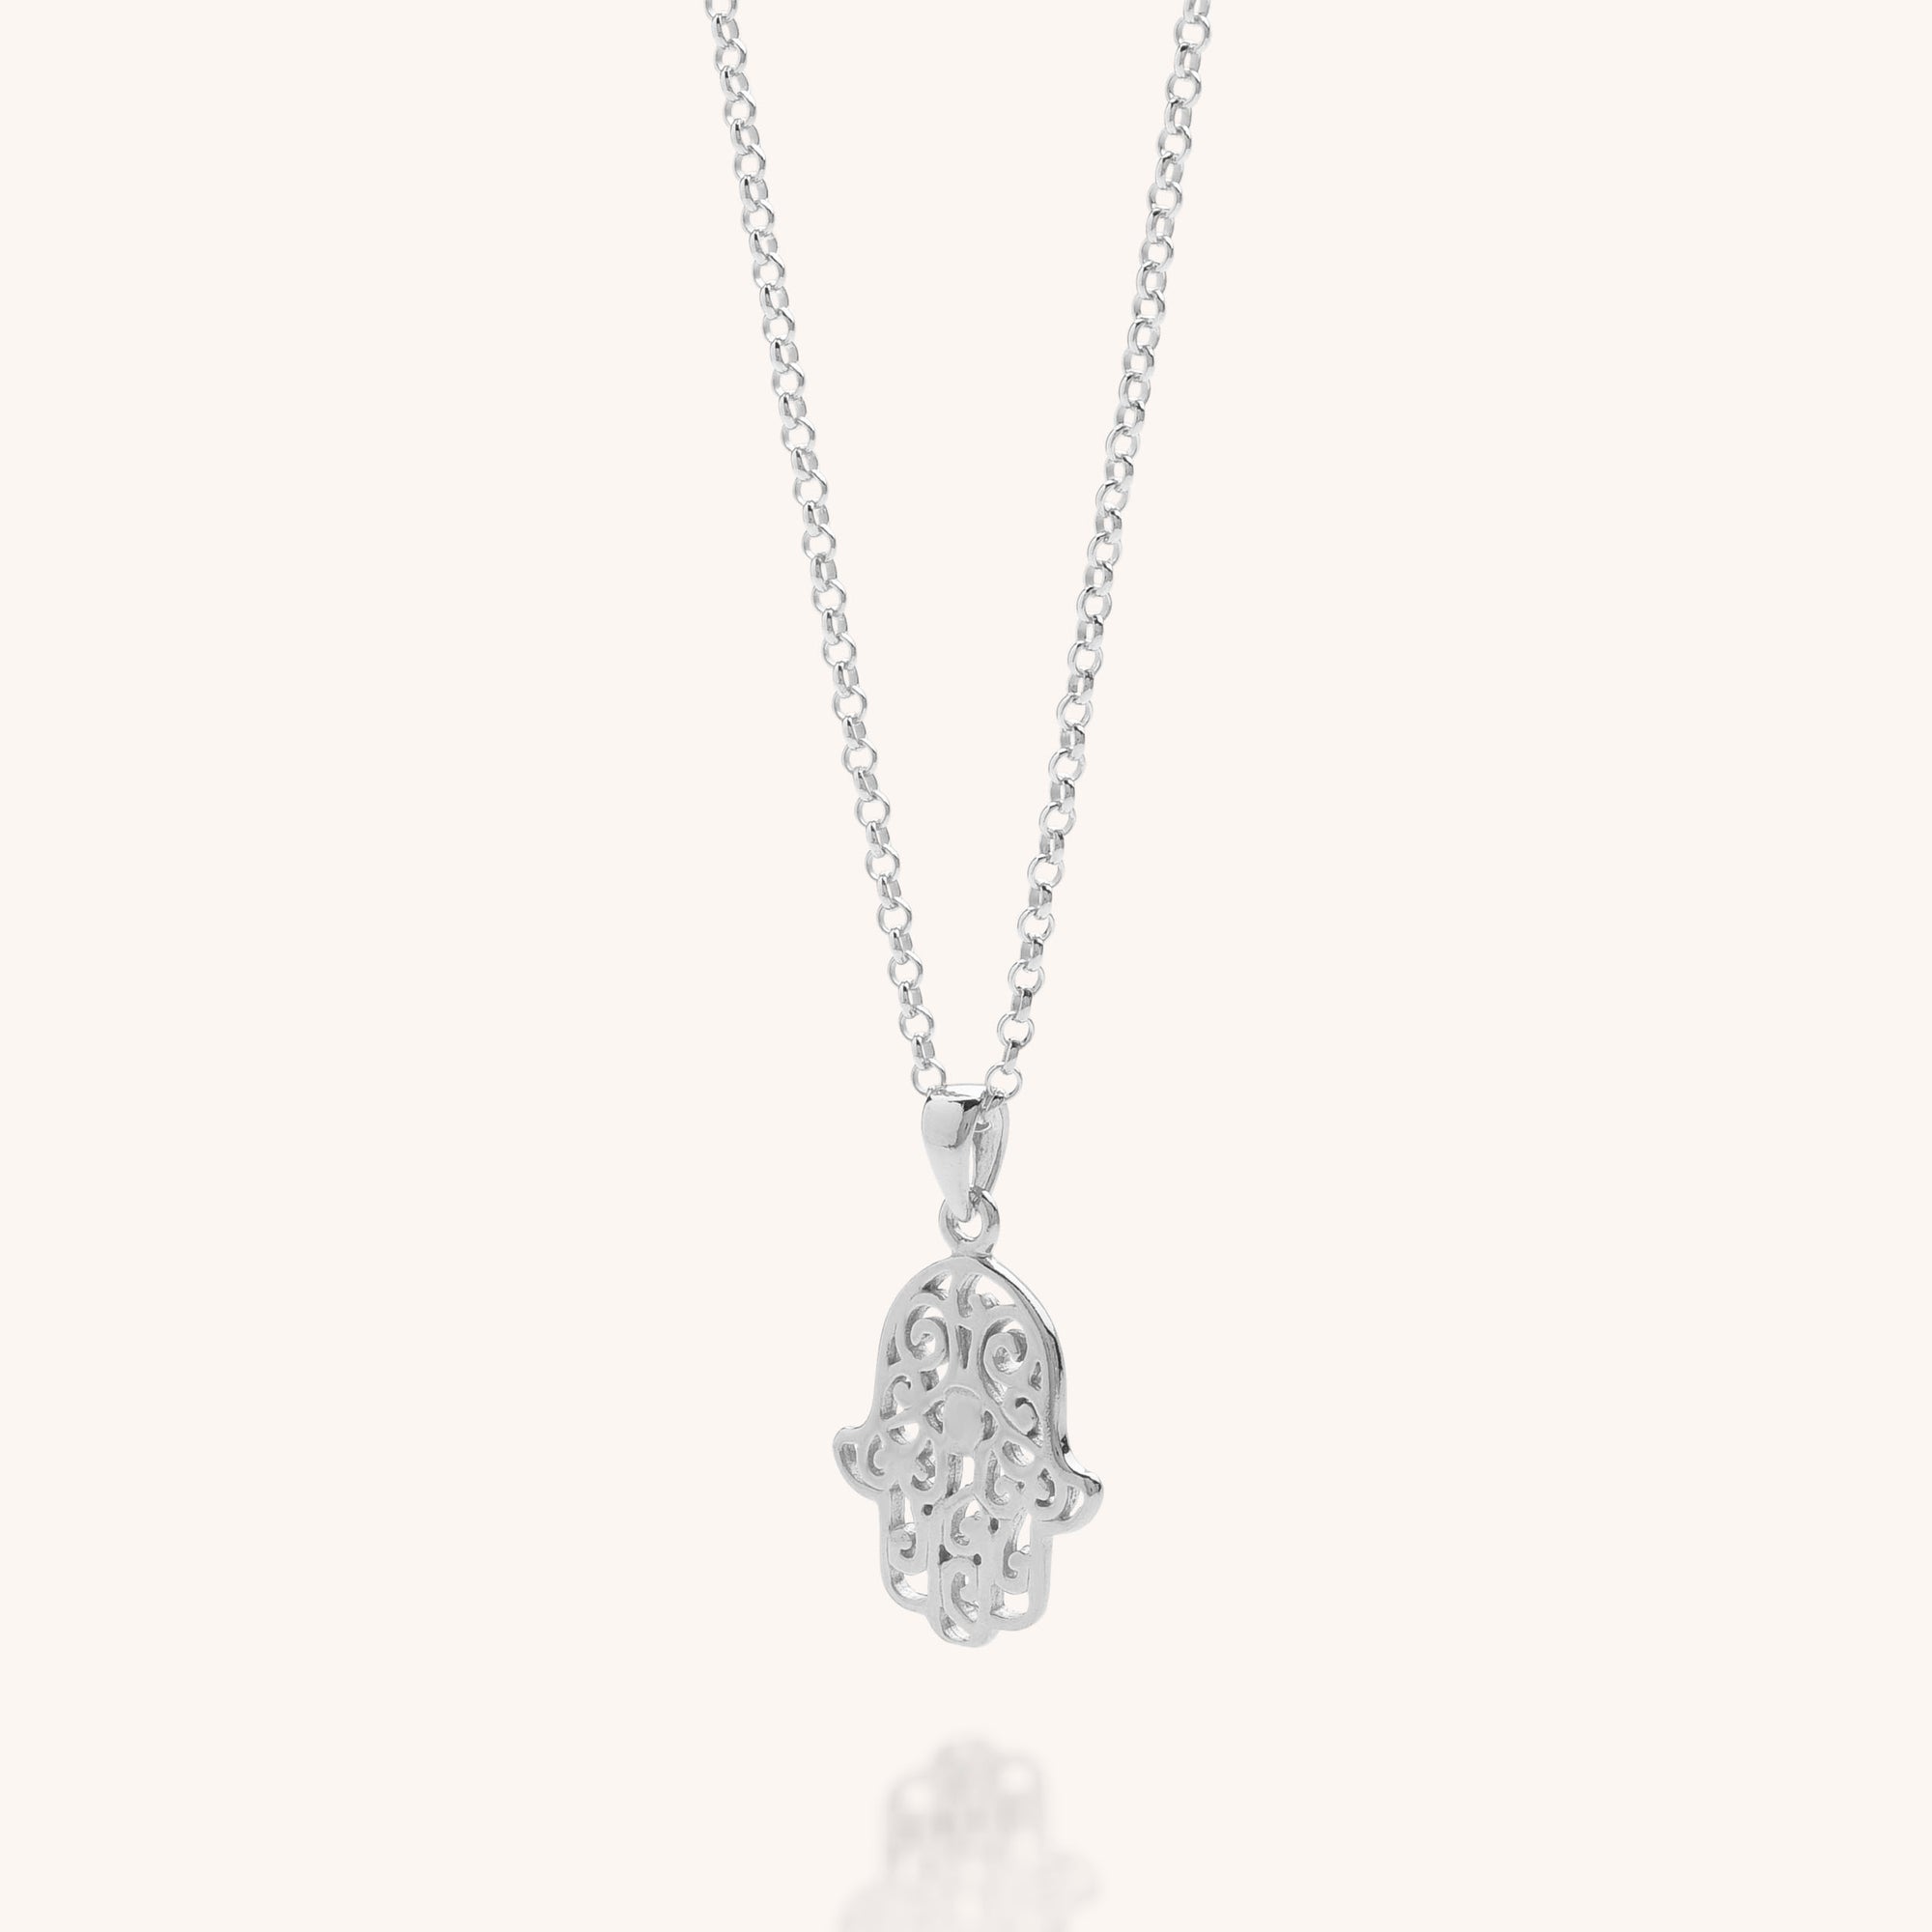 Nellou sterling silver hamsa hand necklace, hand of fatima necklace on eco silver chain perfect for layering, layered necklace